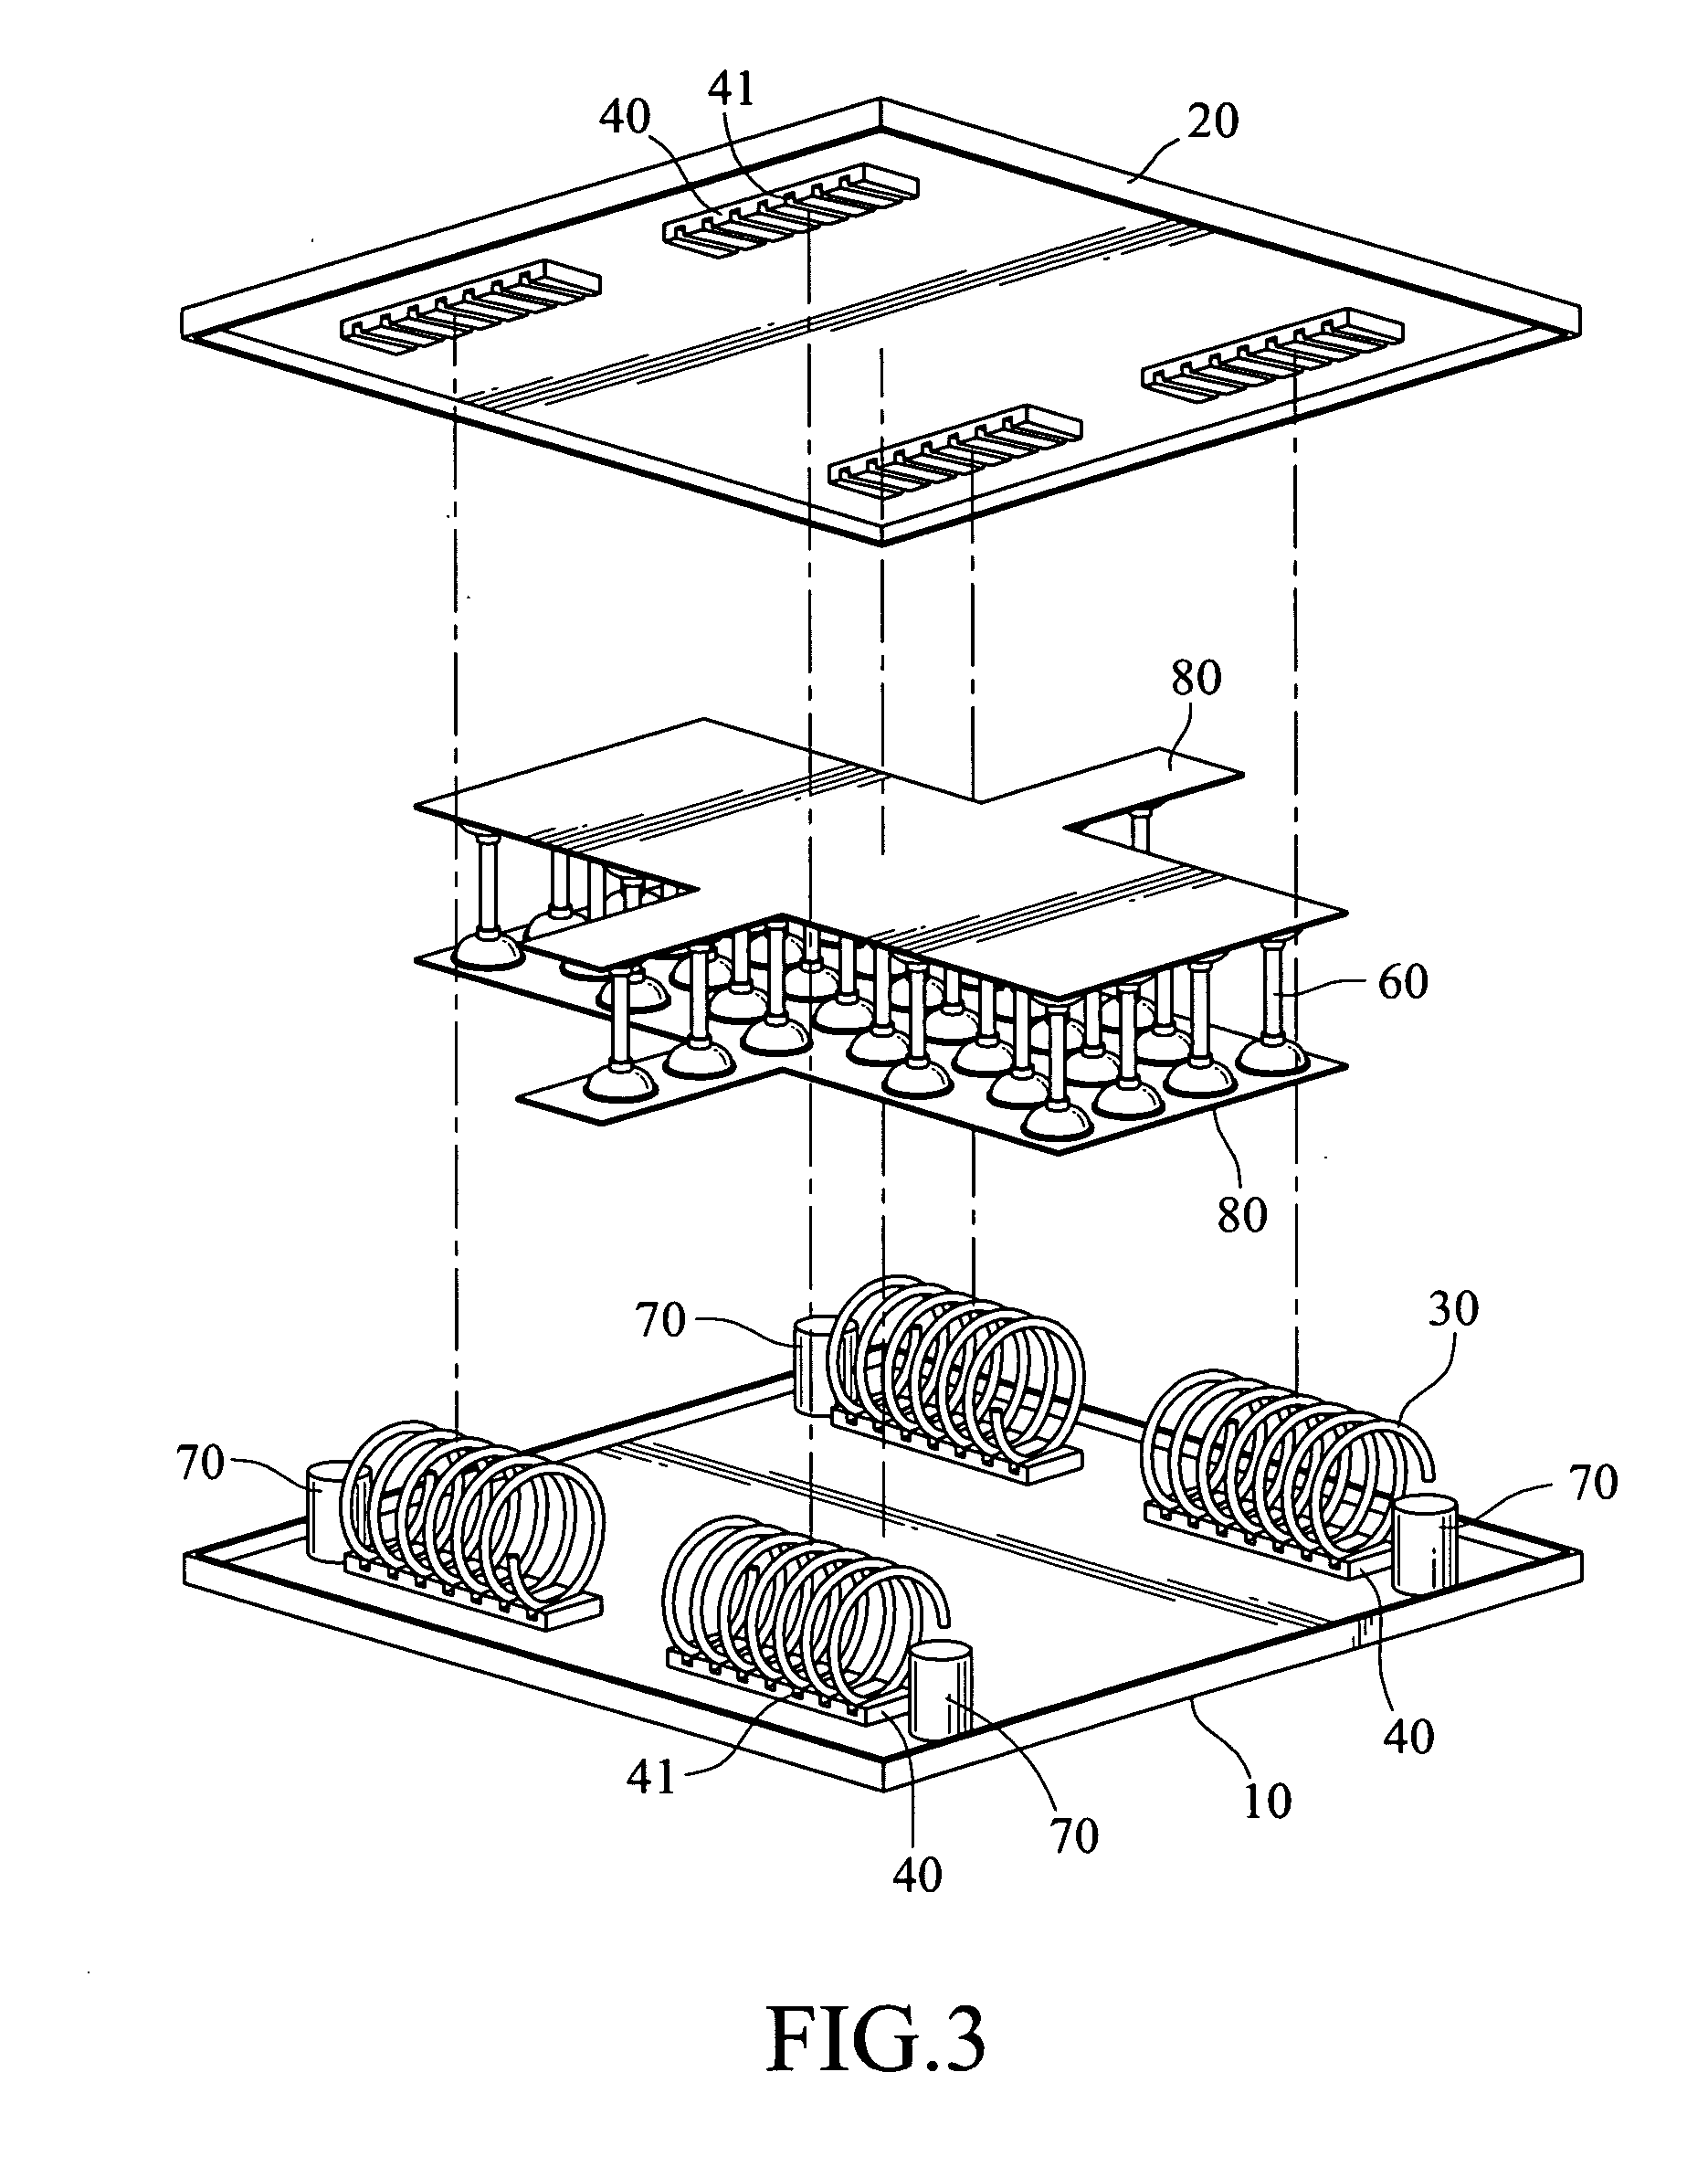 Shock isolation system for electronic devices